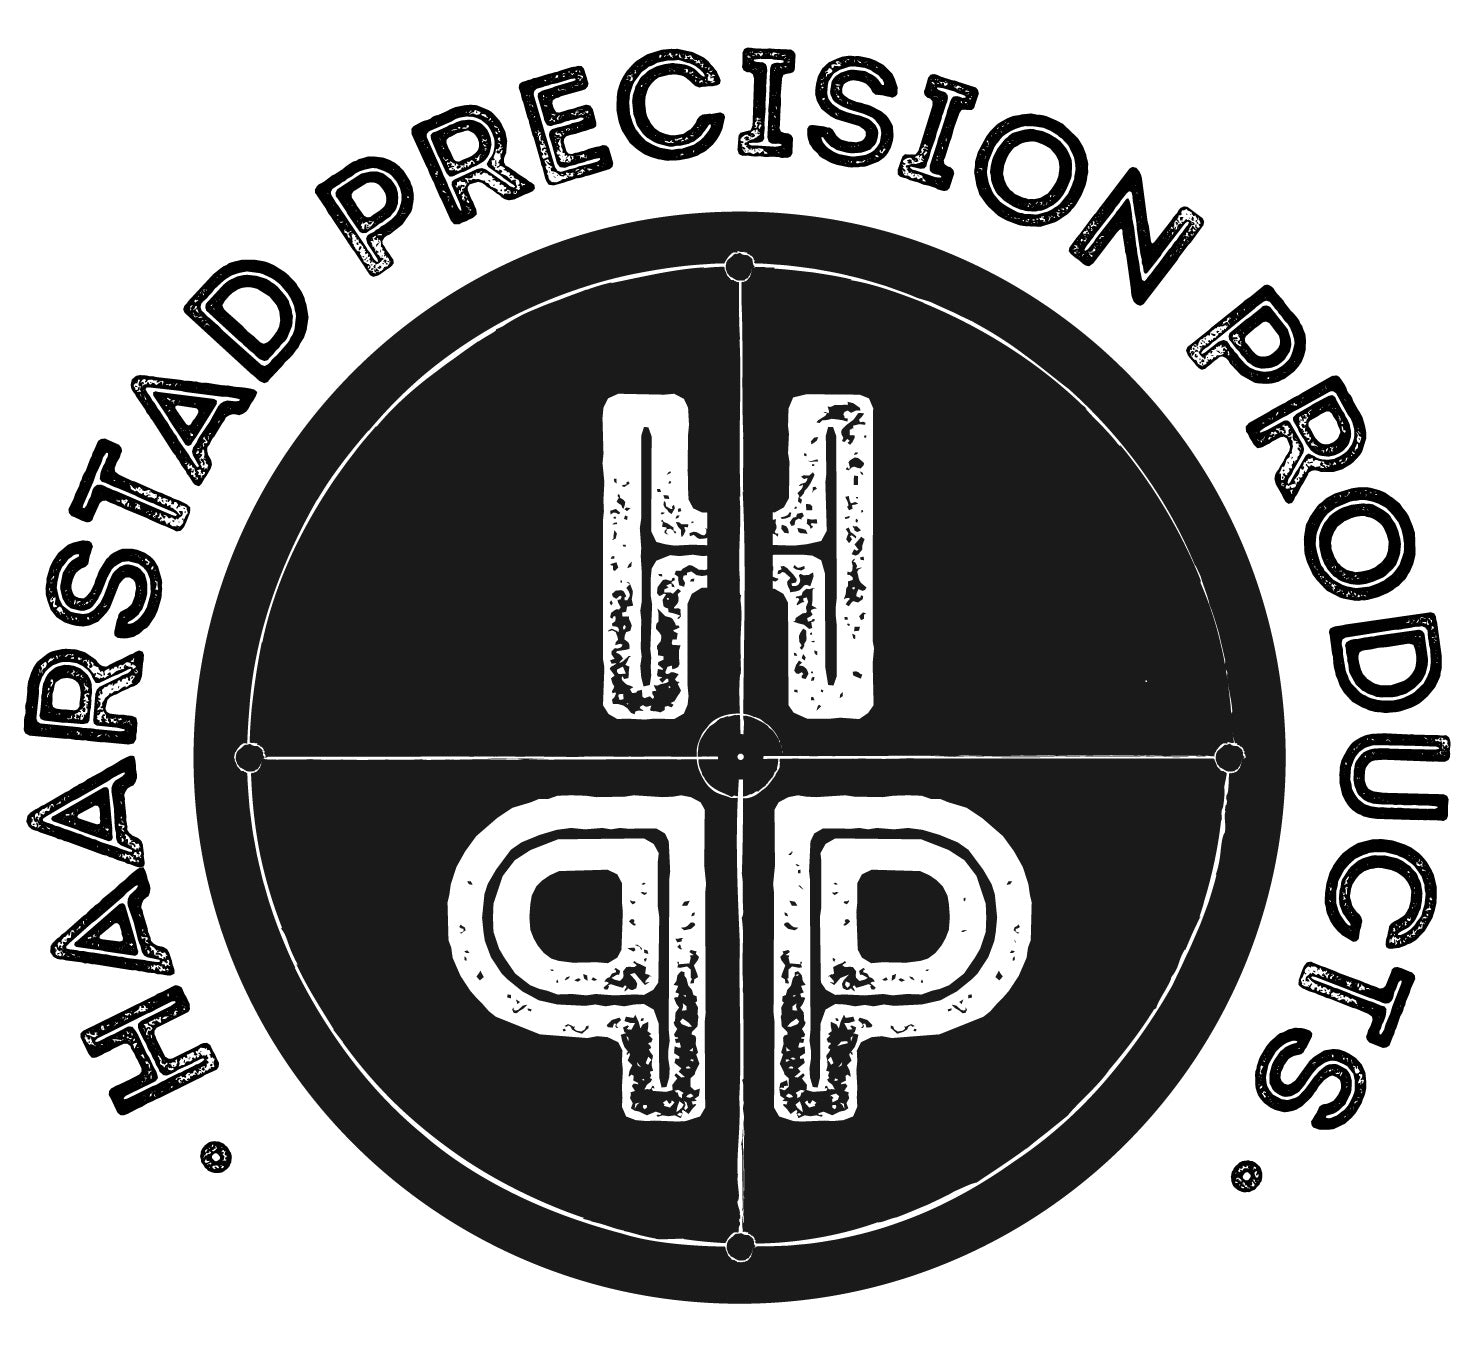 New PSE Rifle Stock Dealer: Haarstad Precision Products Norway